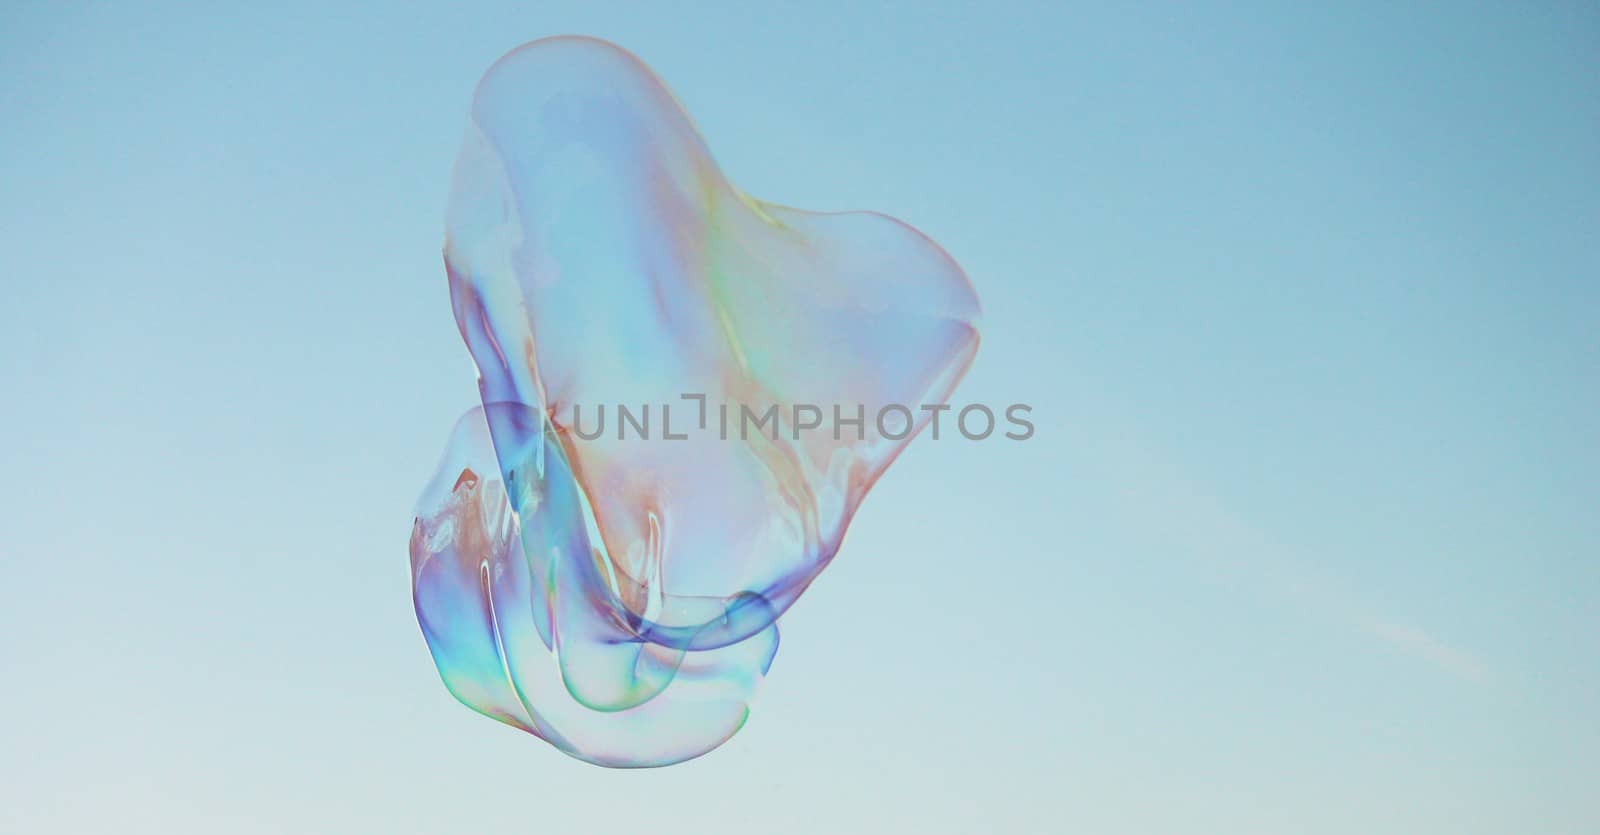 Soap bubbles on a blue sky illuminated by the sun by cheekylorns